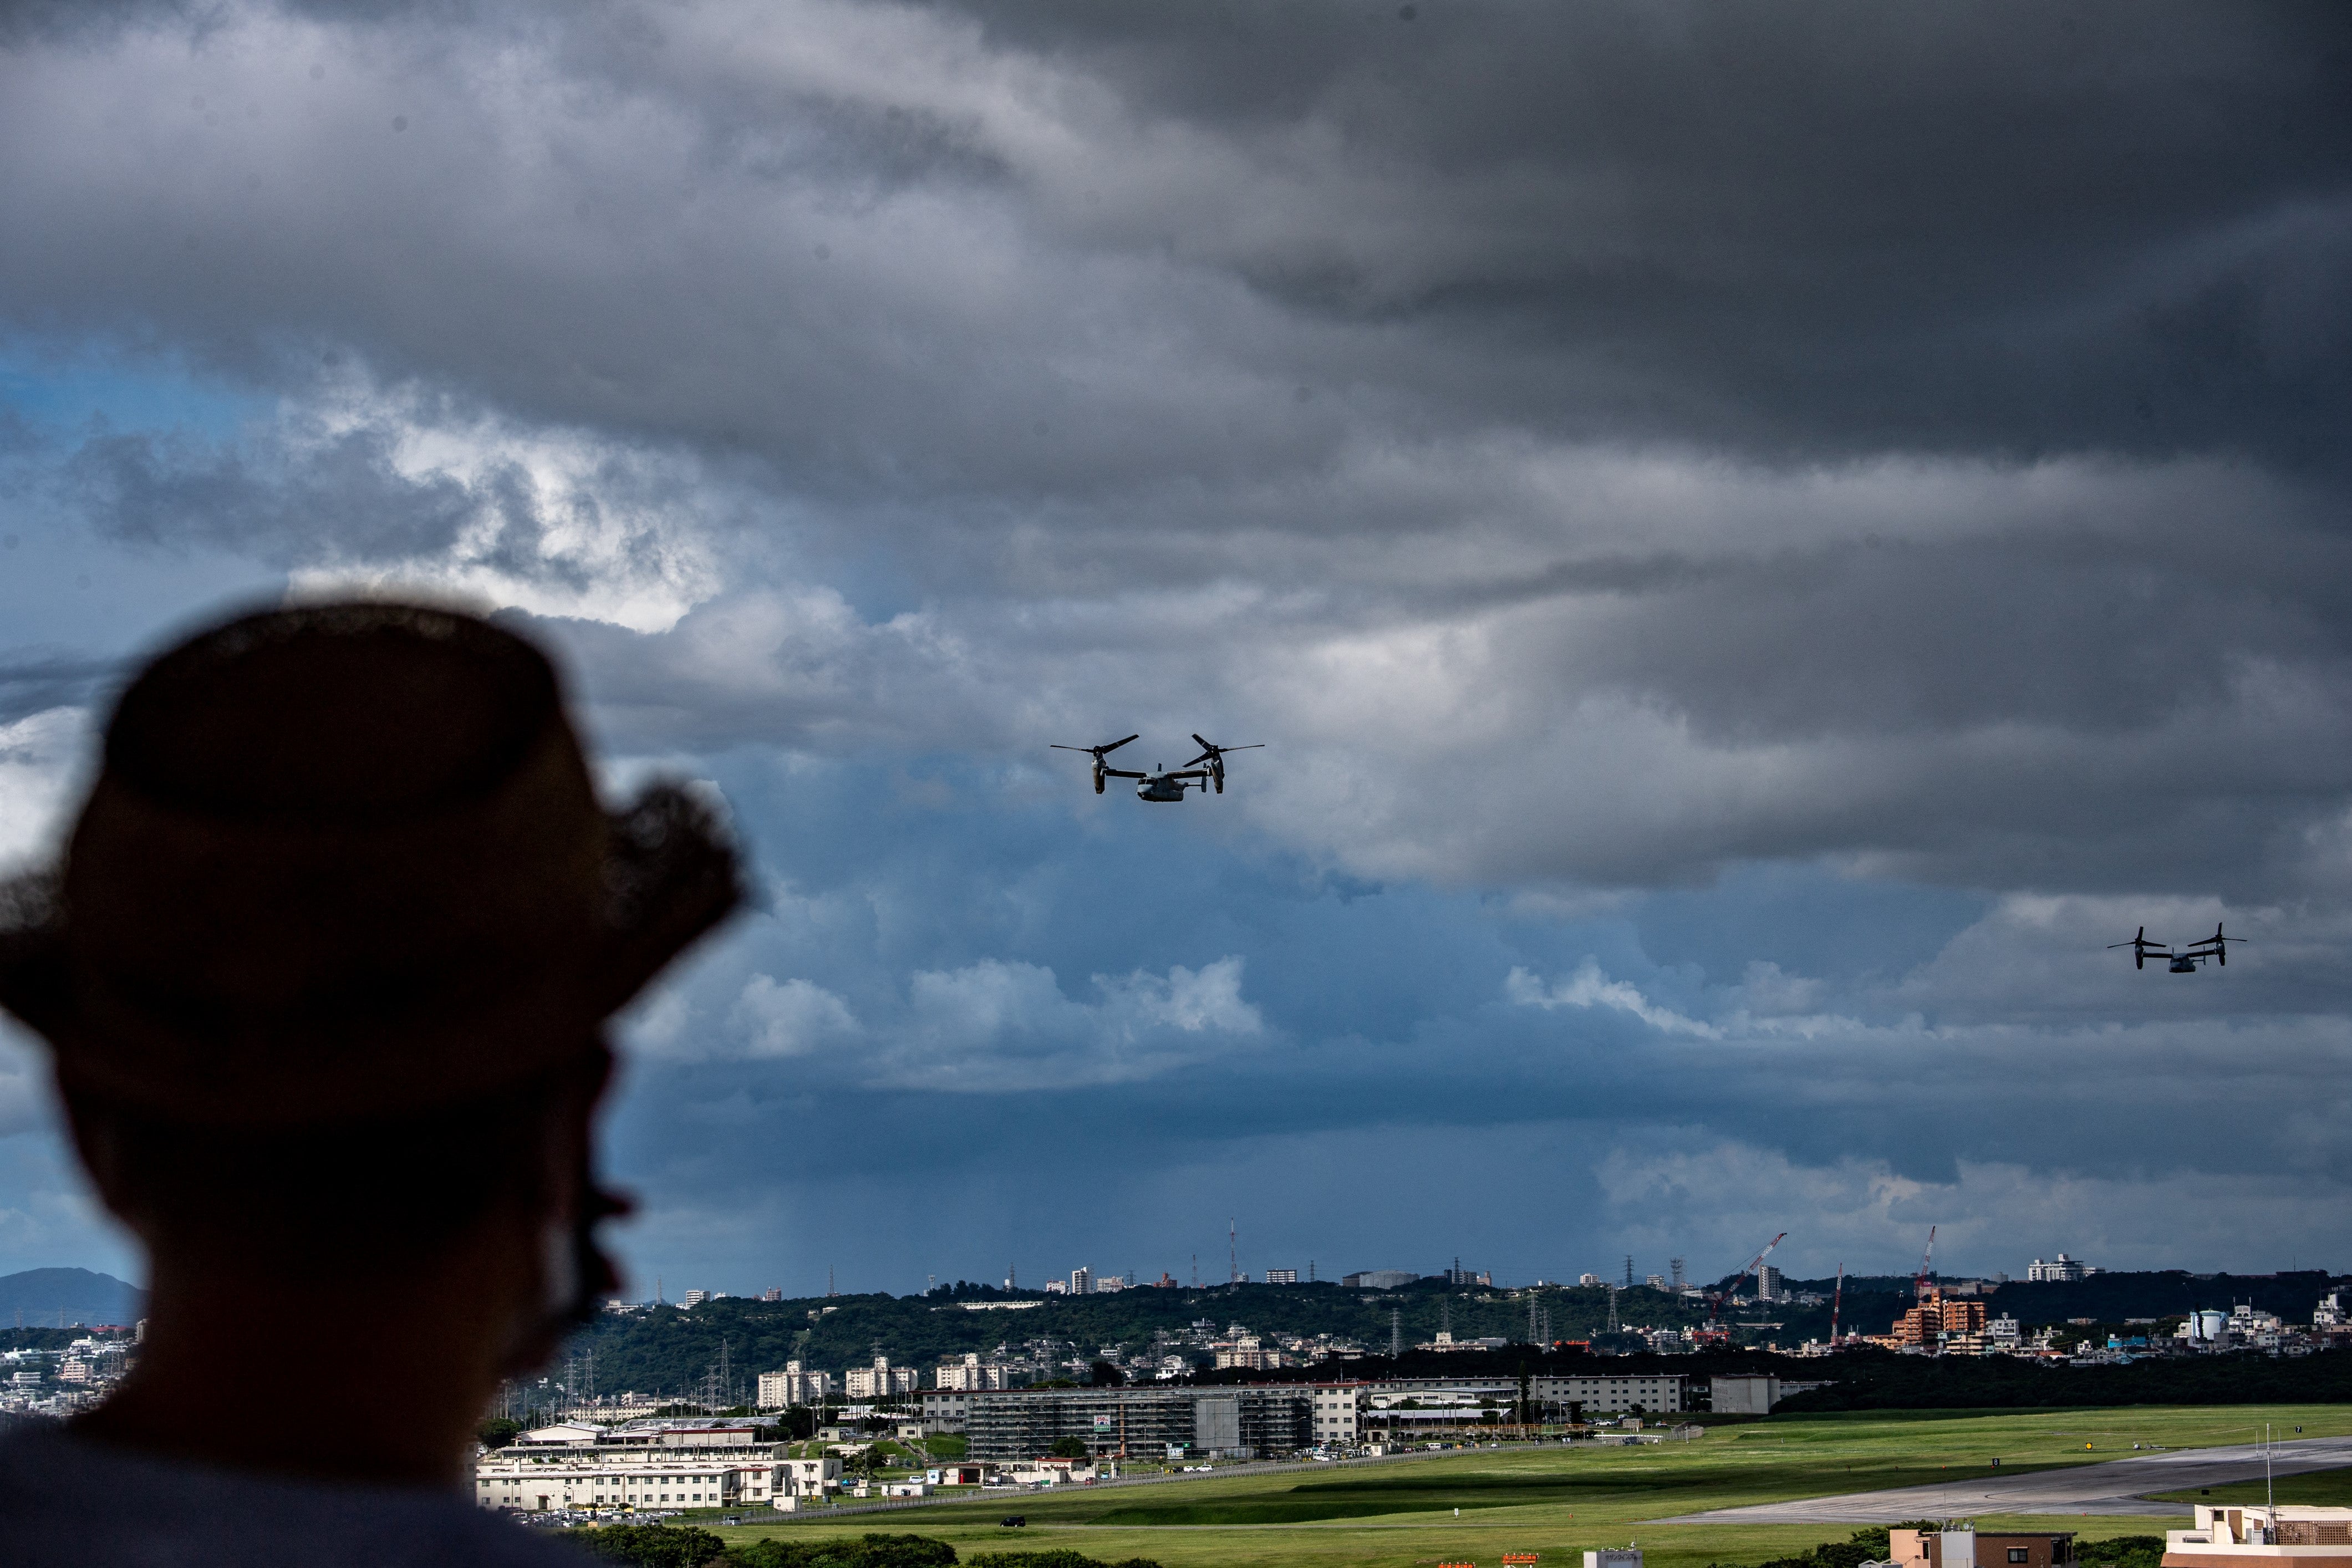 MV-22 Osprey tilt-rotor aircraft in flight after taking off from US Marine Corps Air Station Futenma, as a person looks on towards the military base from Kakazutakadai Park in the city of Ginowan, Okinawa prefecture